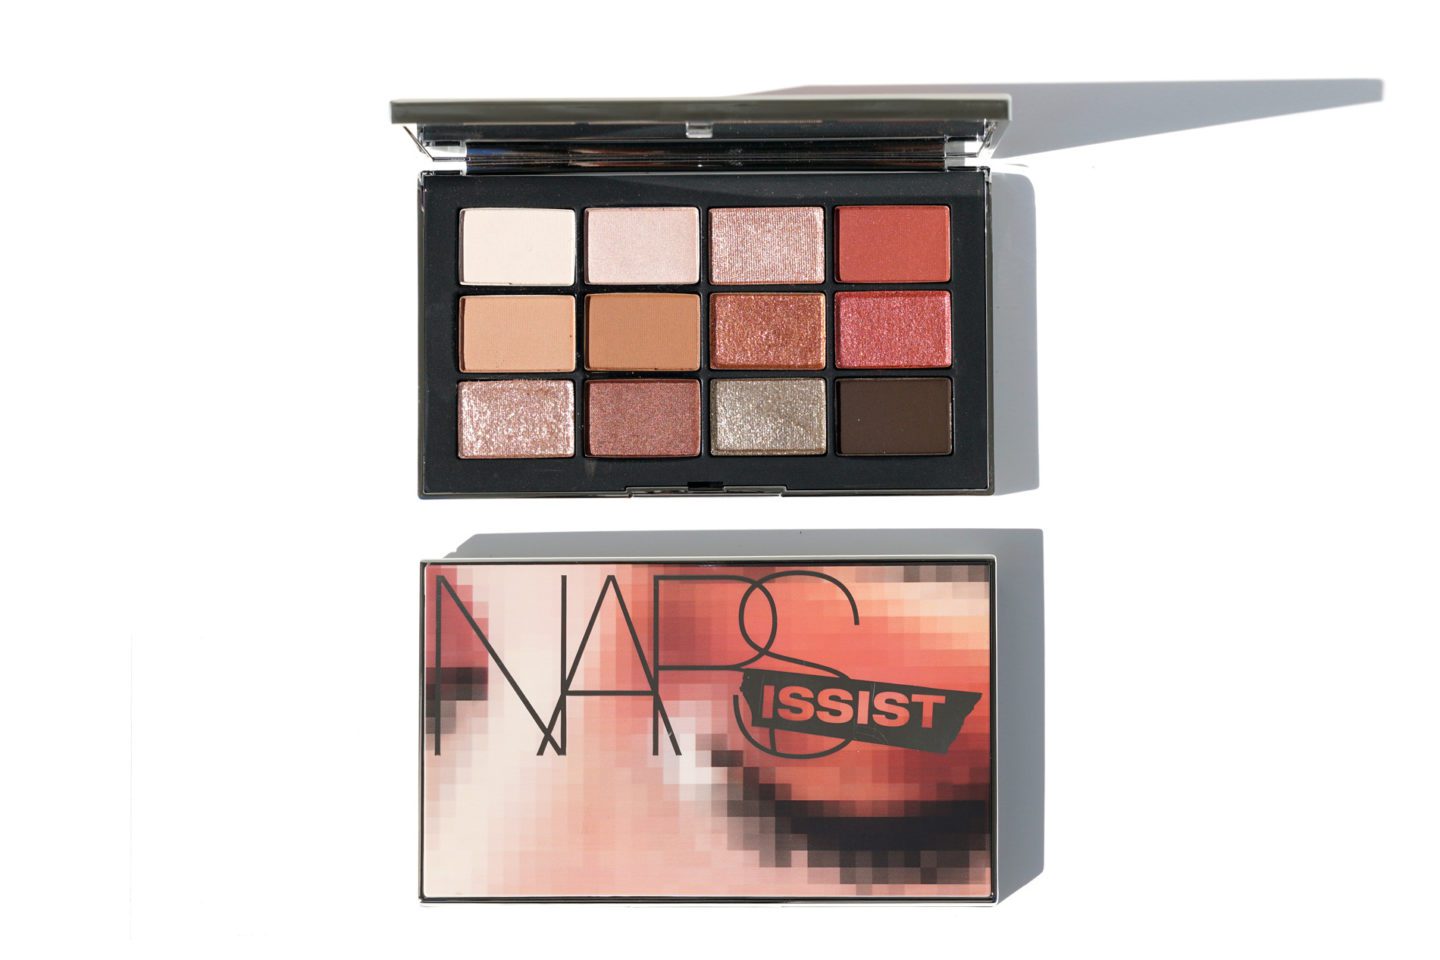 NARS NARSissist Wanted Eyeshadow Palette Sephora Cyber Monday Exclusive | The Beauty Look Book